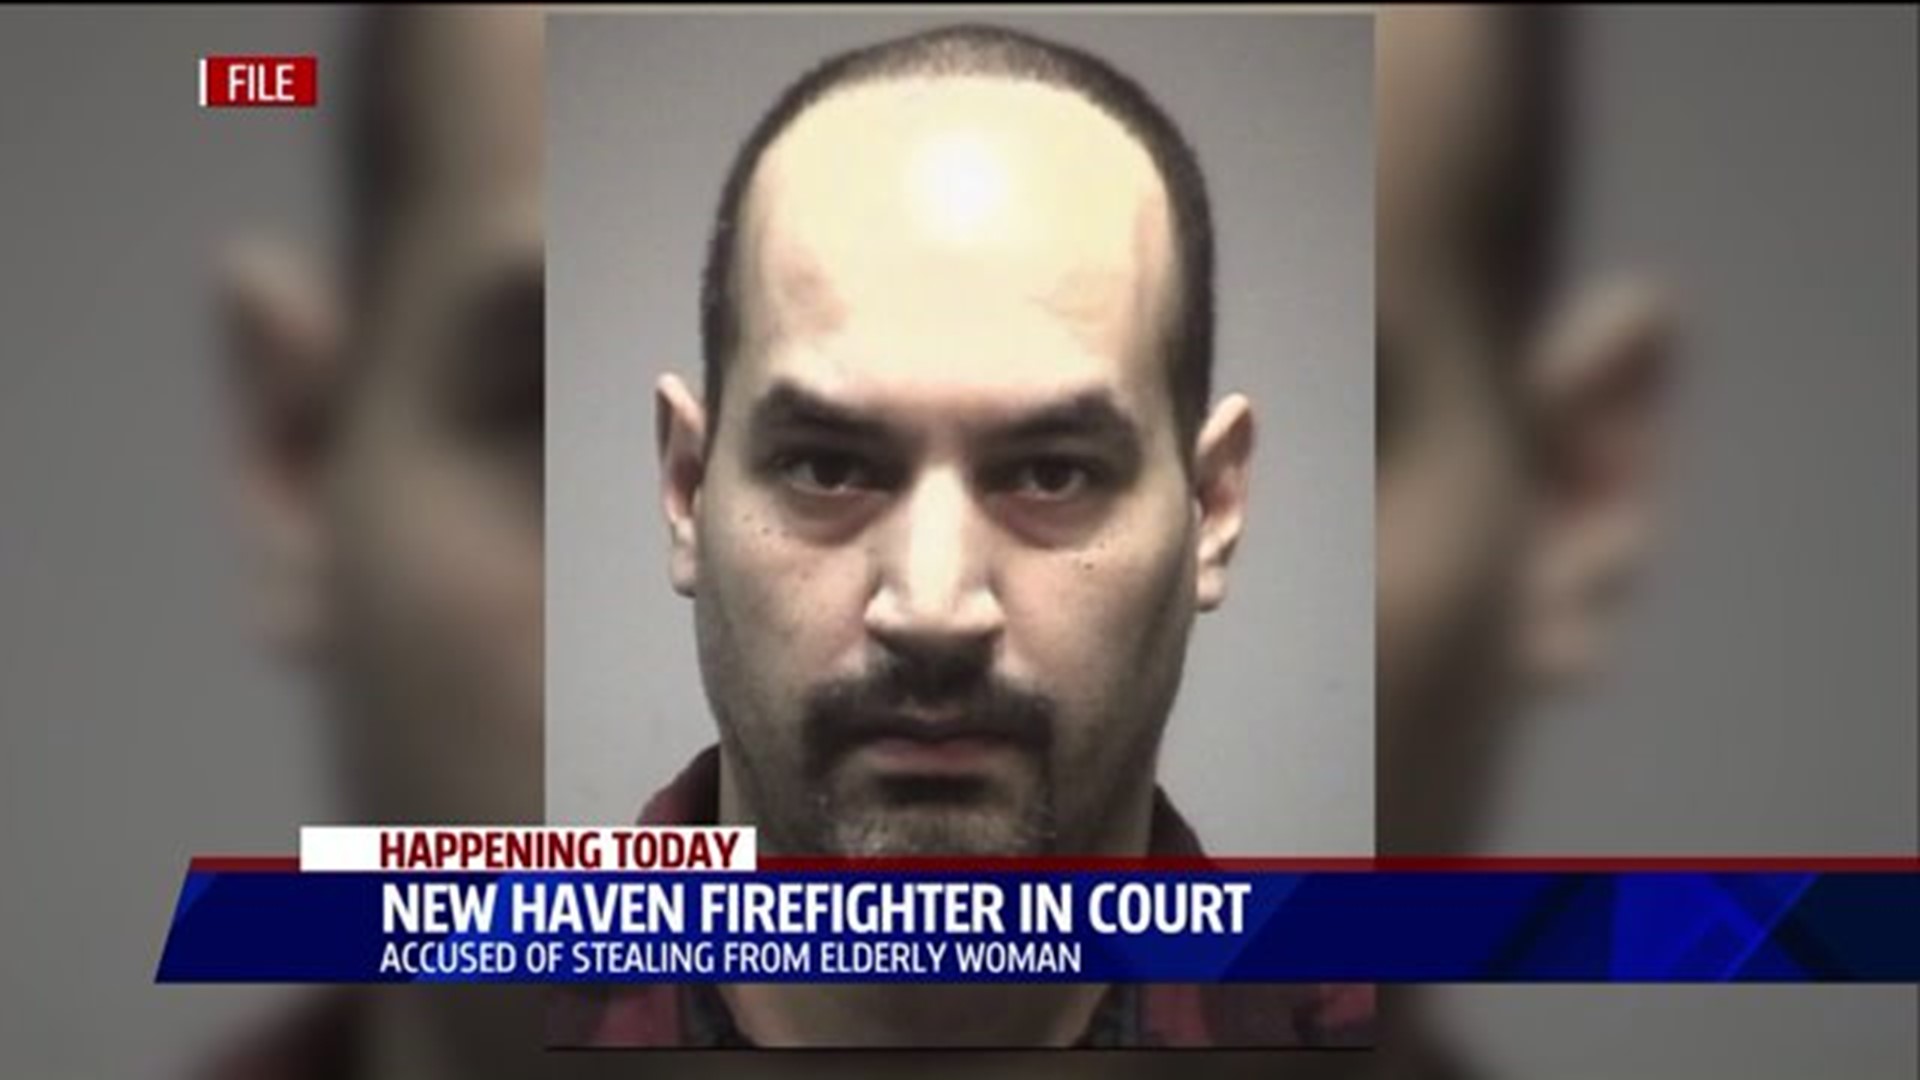 New Haven firefighter in court